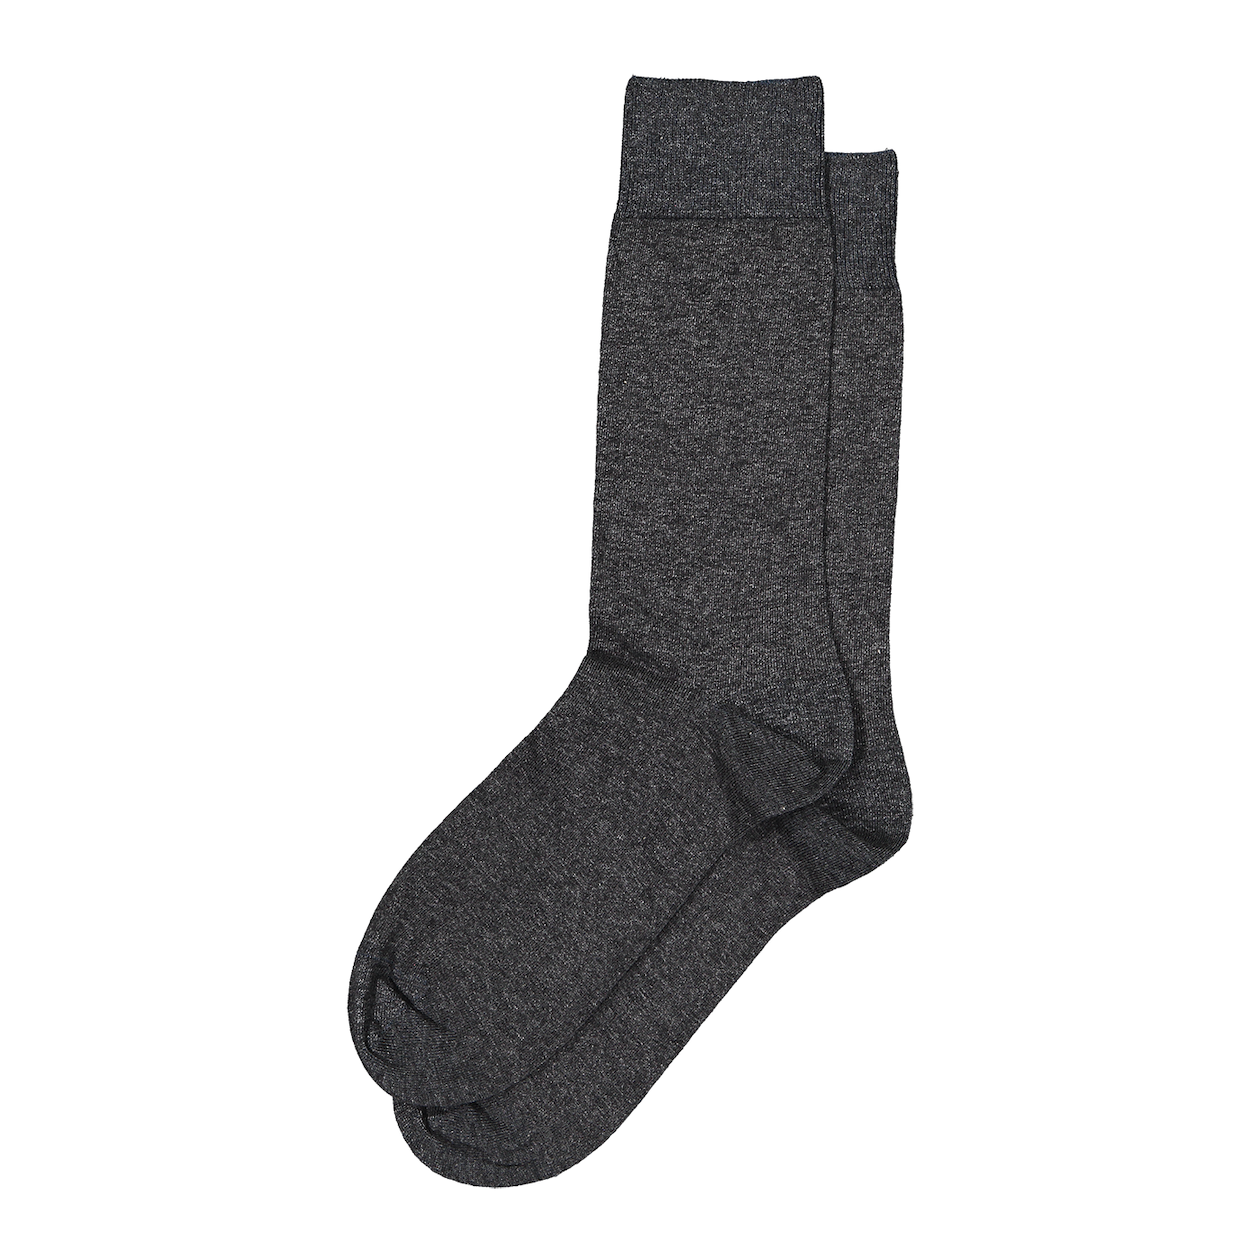 Men's Socks  Sustainable Clothing at